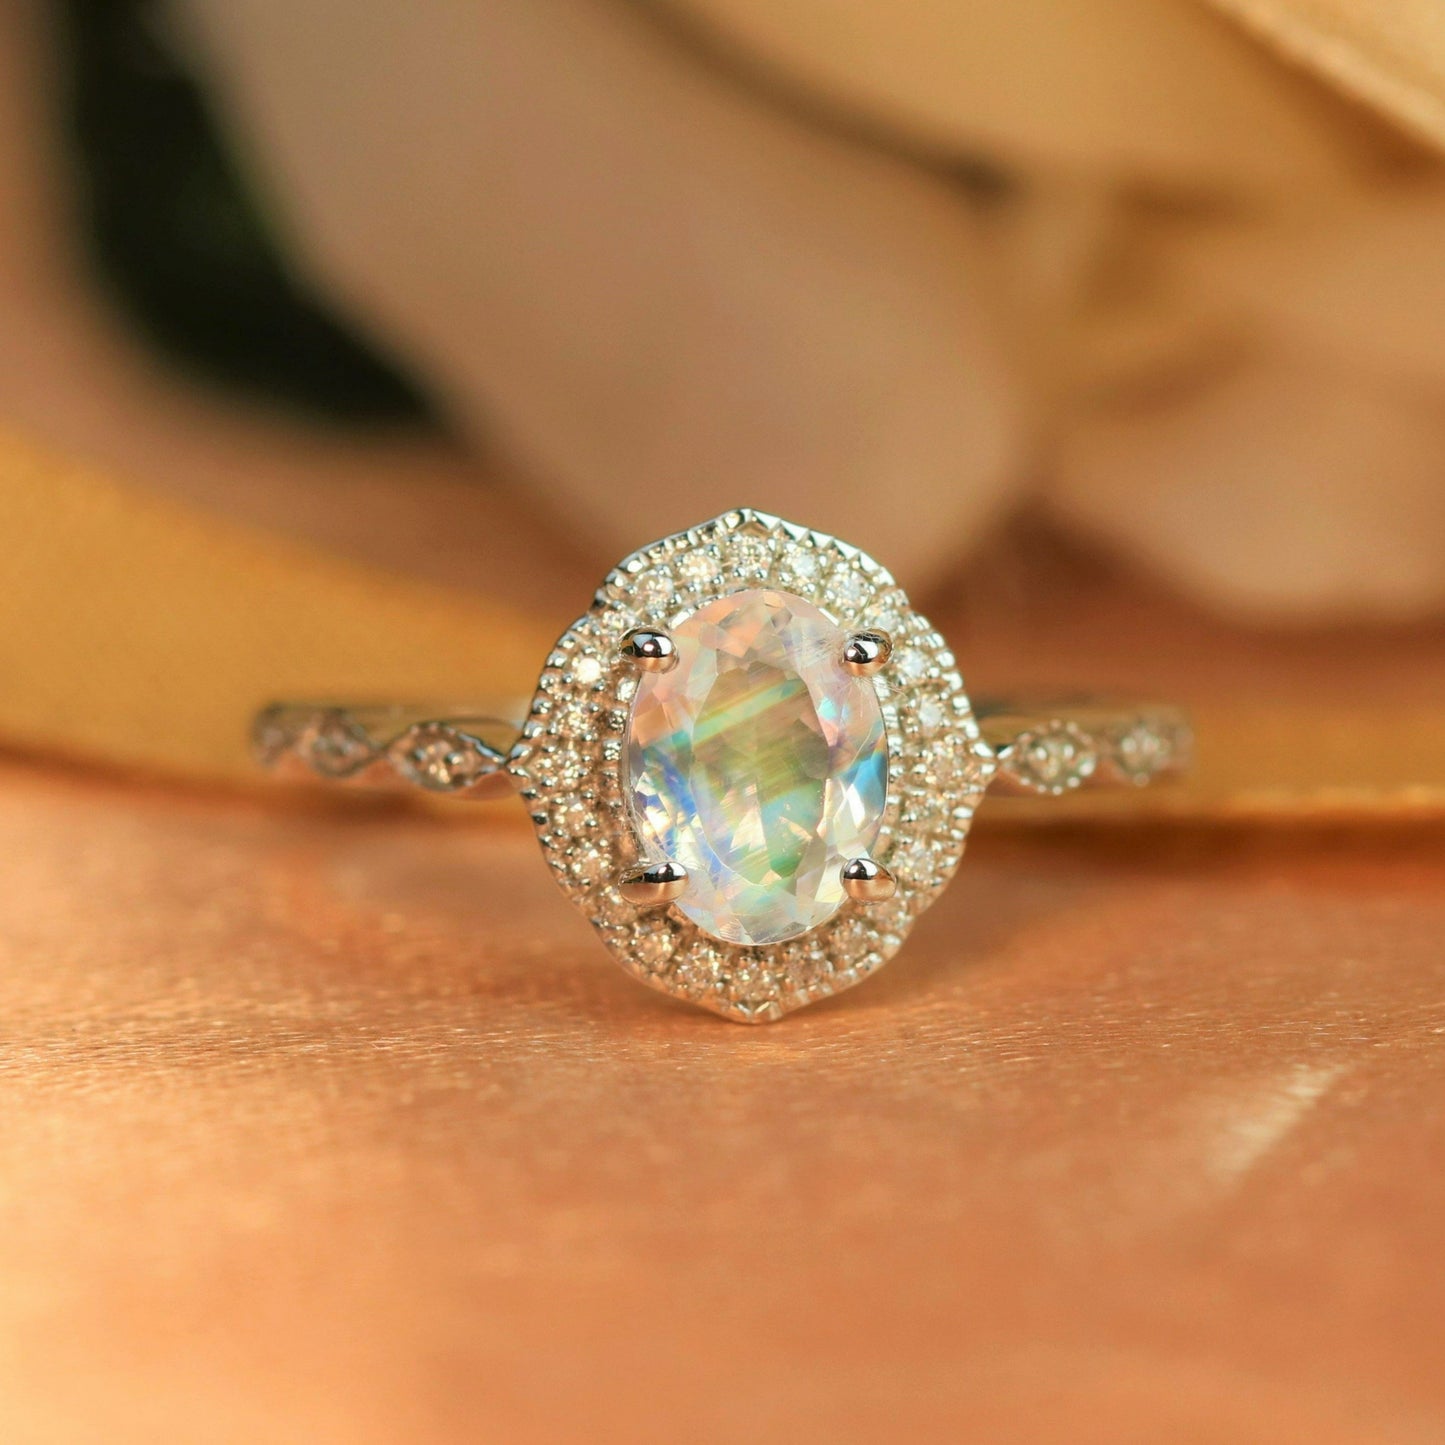 Antique Vintage 1.5 carat Oval Cut Rainbow Moonstone Halo Ring in White Gold